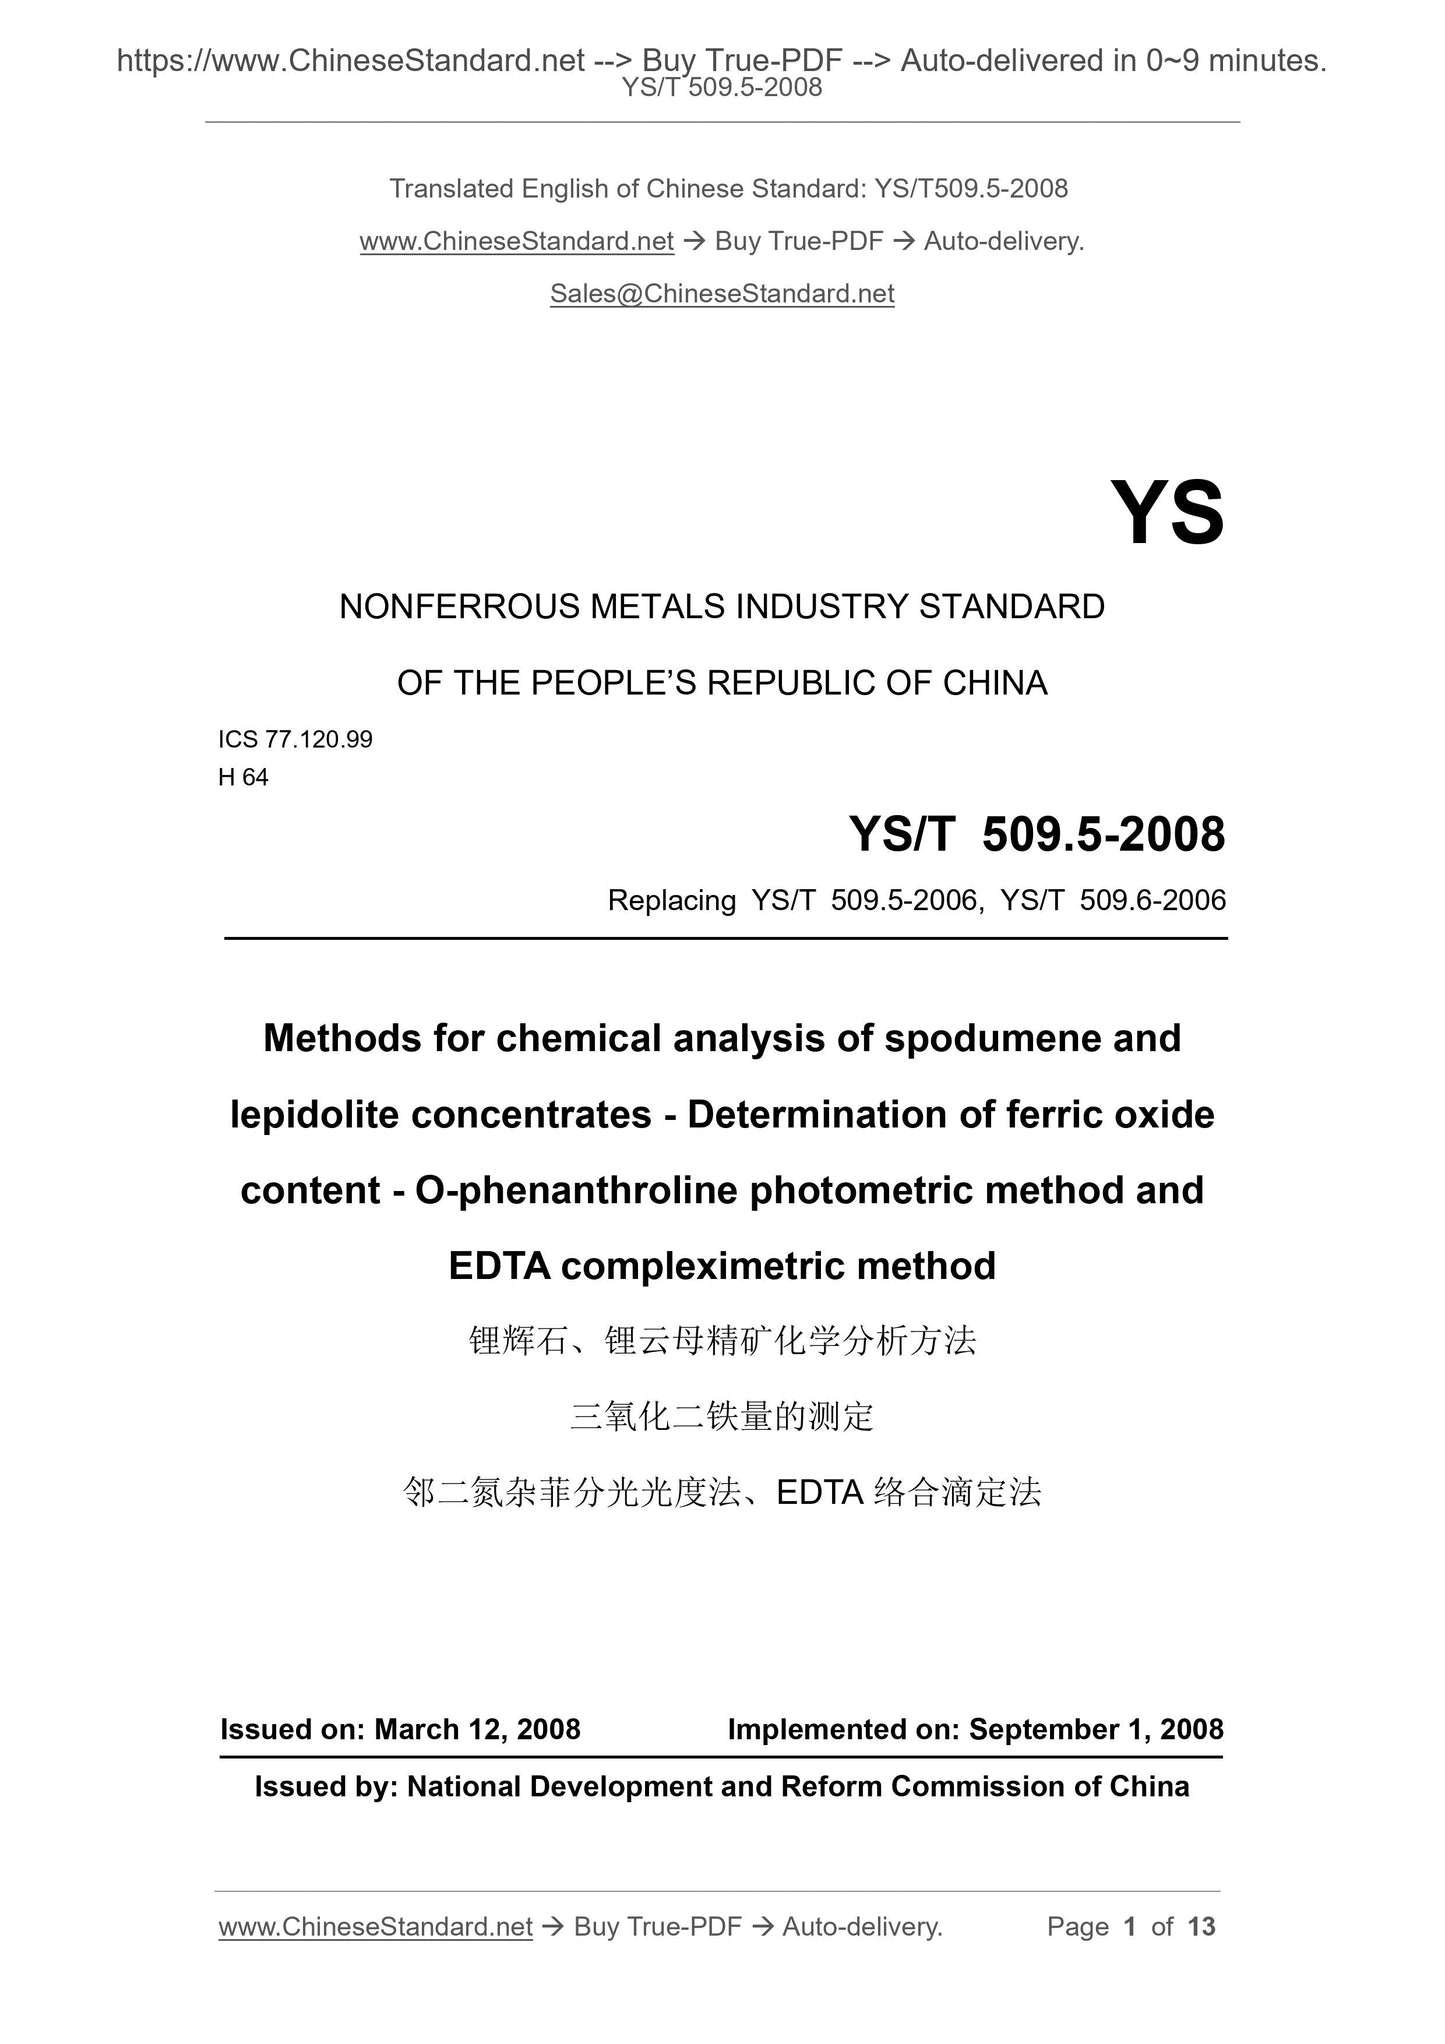 YS/T 509.5-2008 Page 1